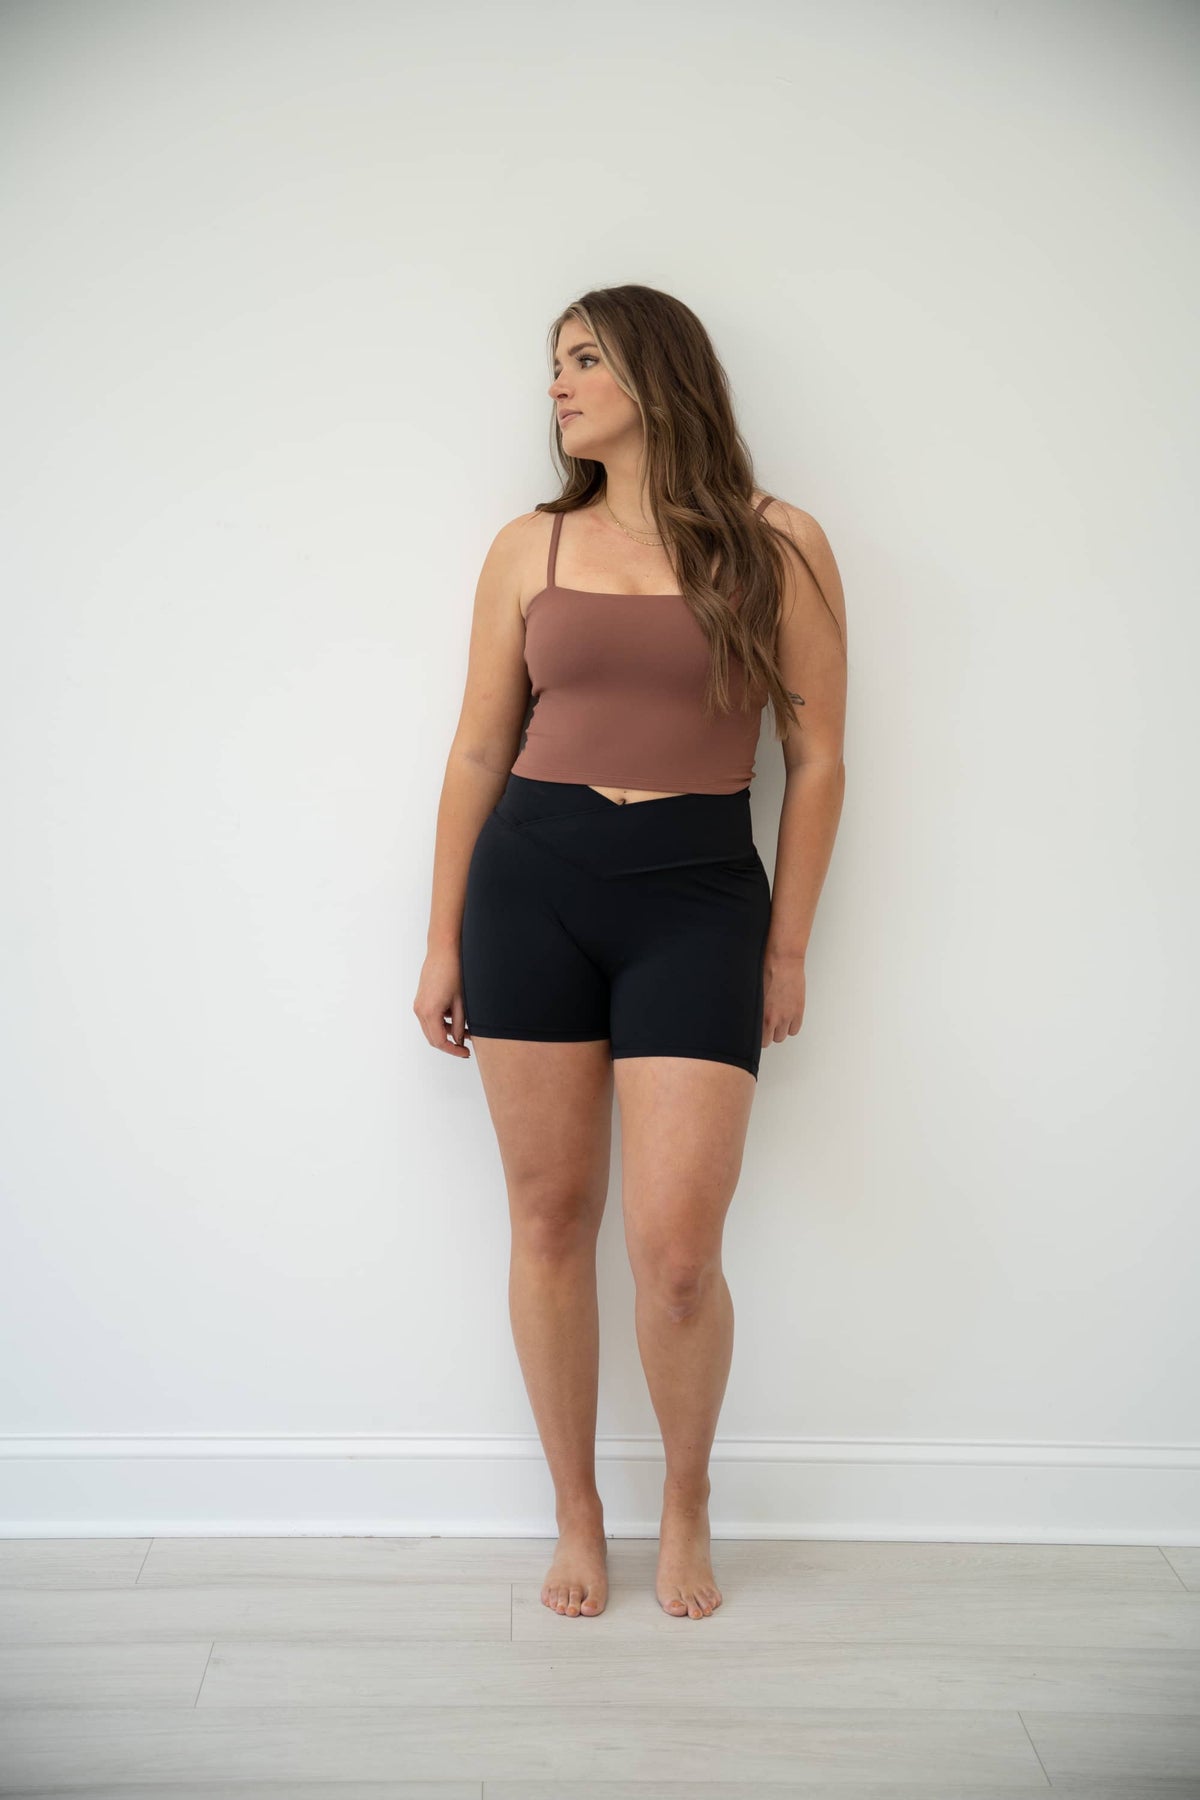 Rust BRILLIANT Push-Up Brami with built-in, padded bra and buttery soft fabric.